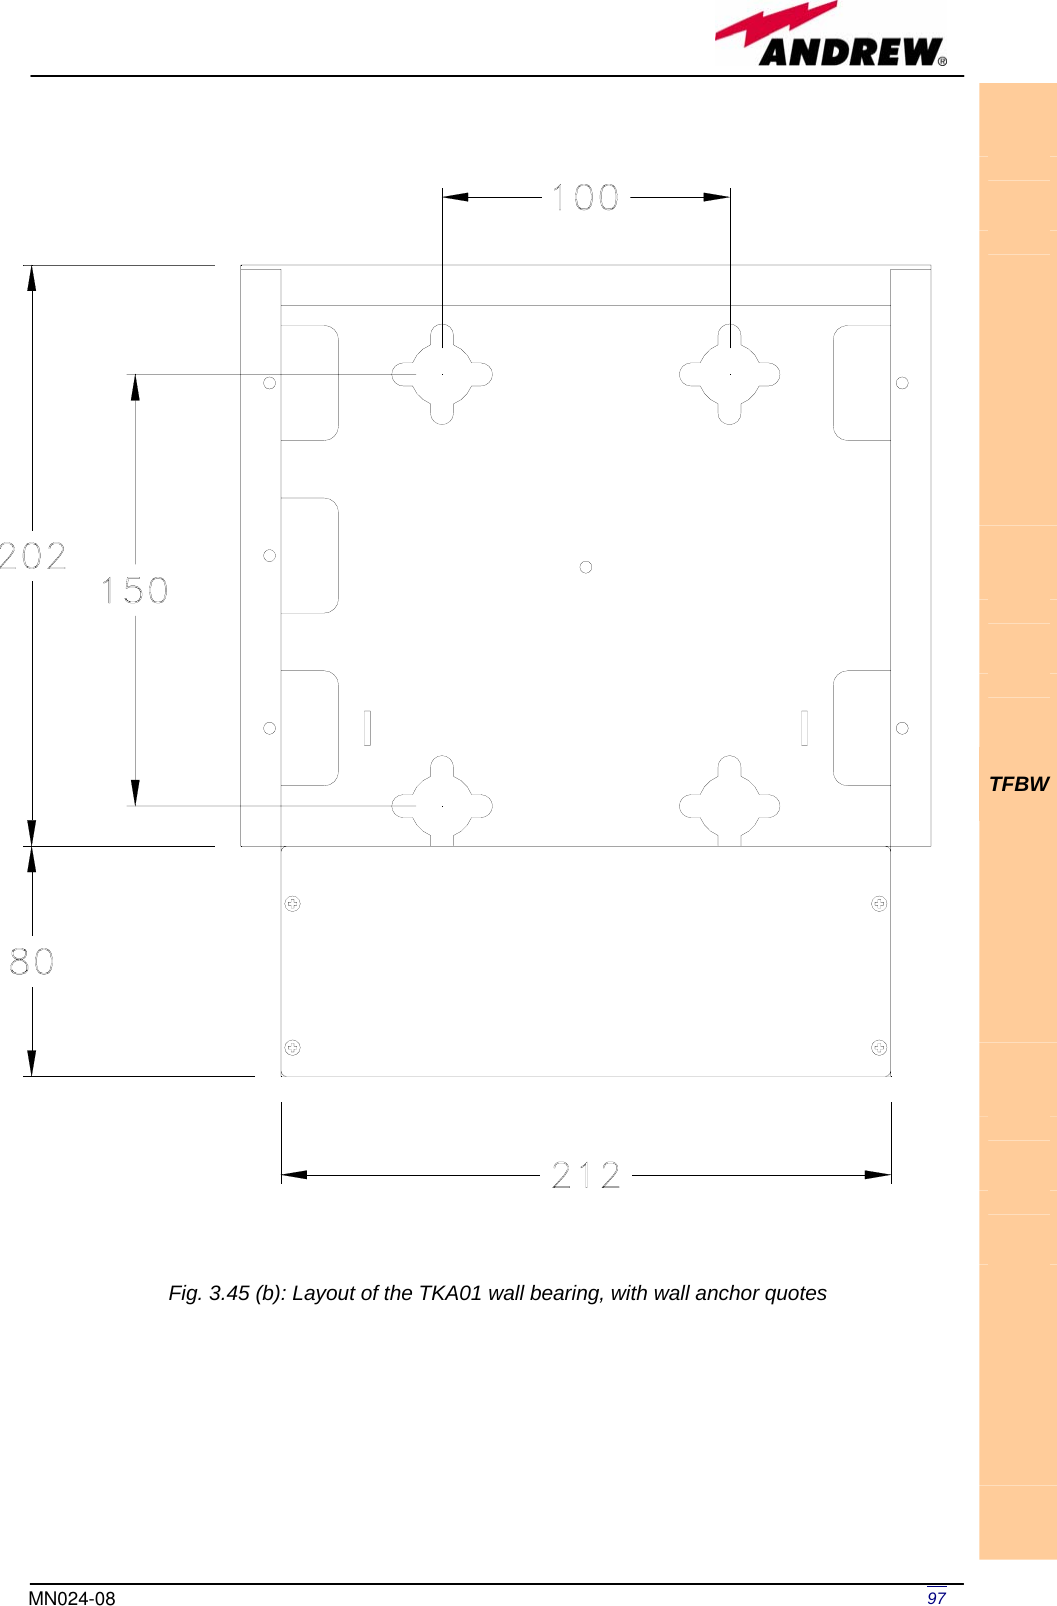   97MN024-08                                TFBW          Fig. 3.45 (b): Layout of the TKA01 wall bearing, with wall anchor quotes 